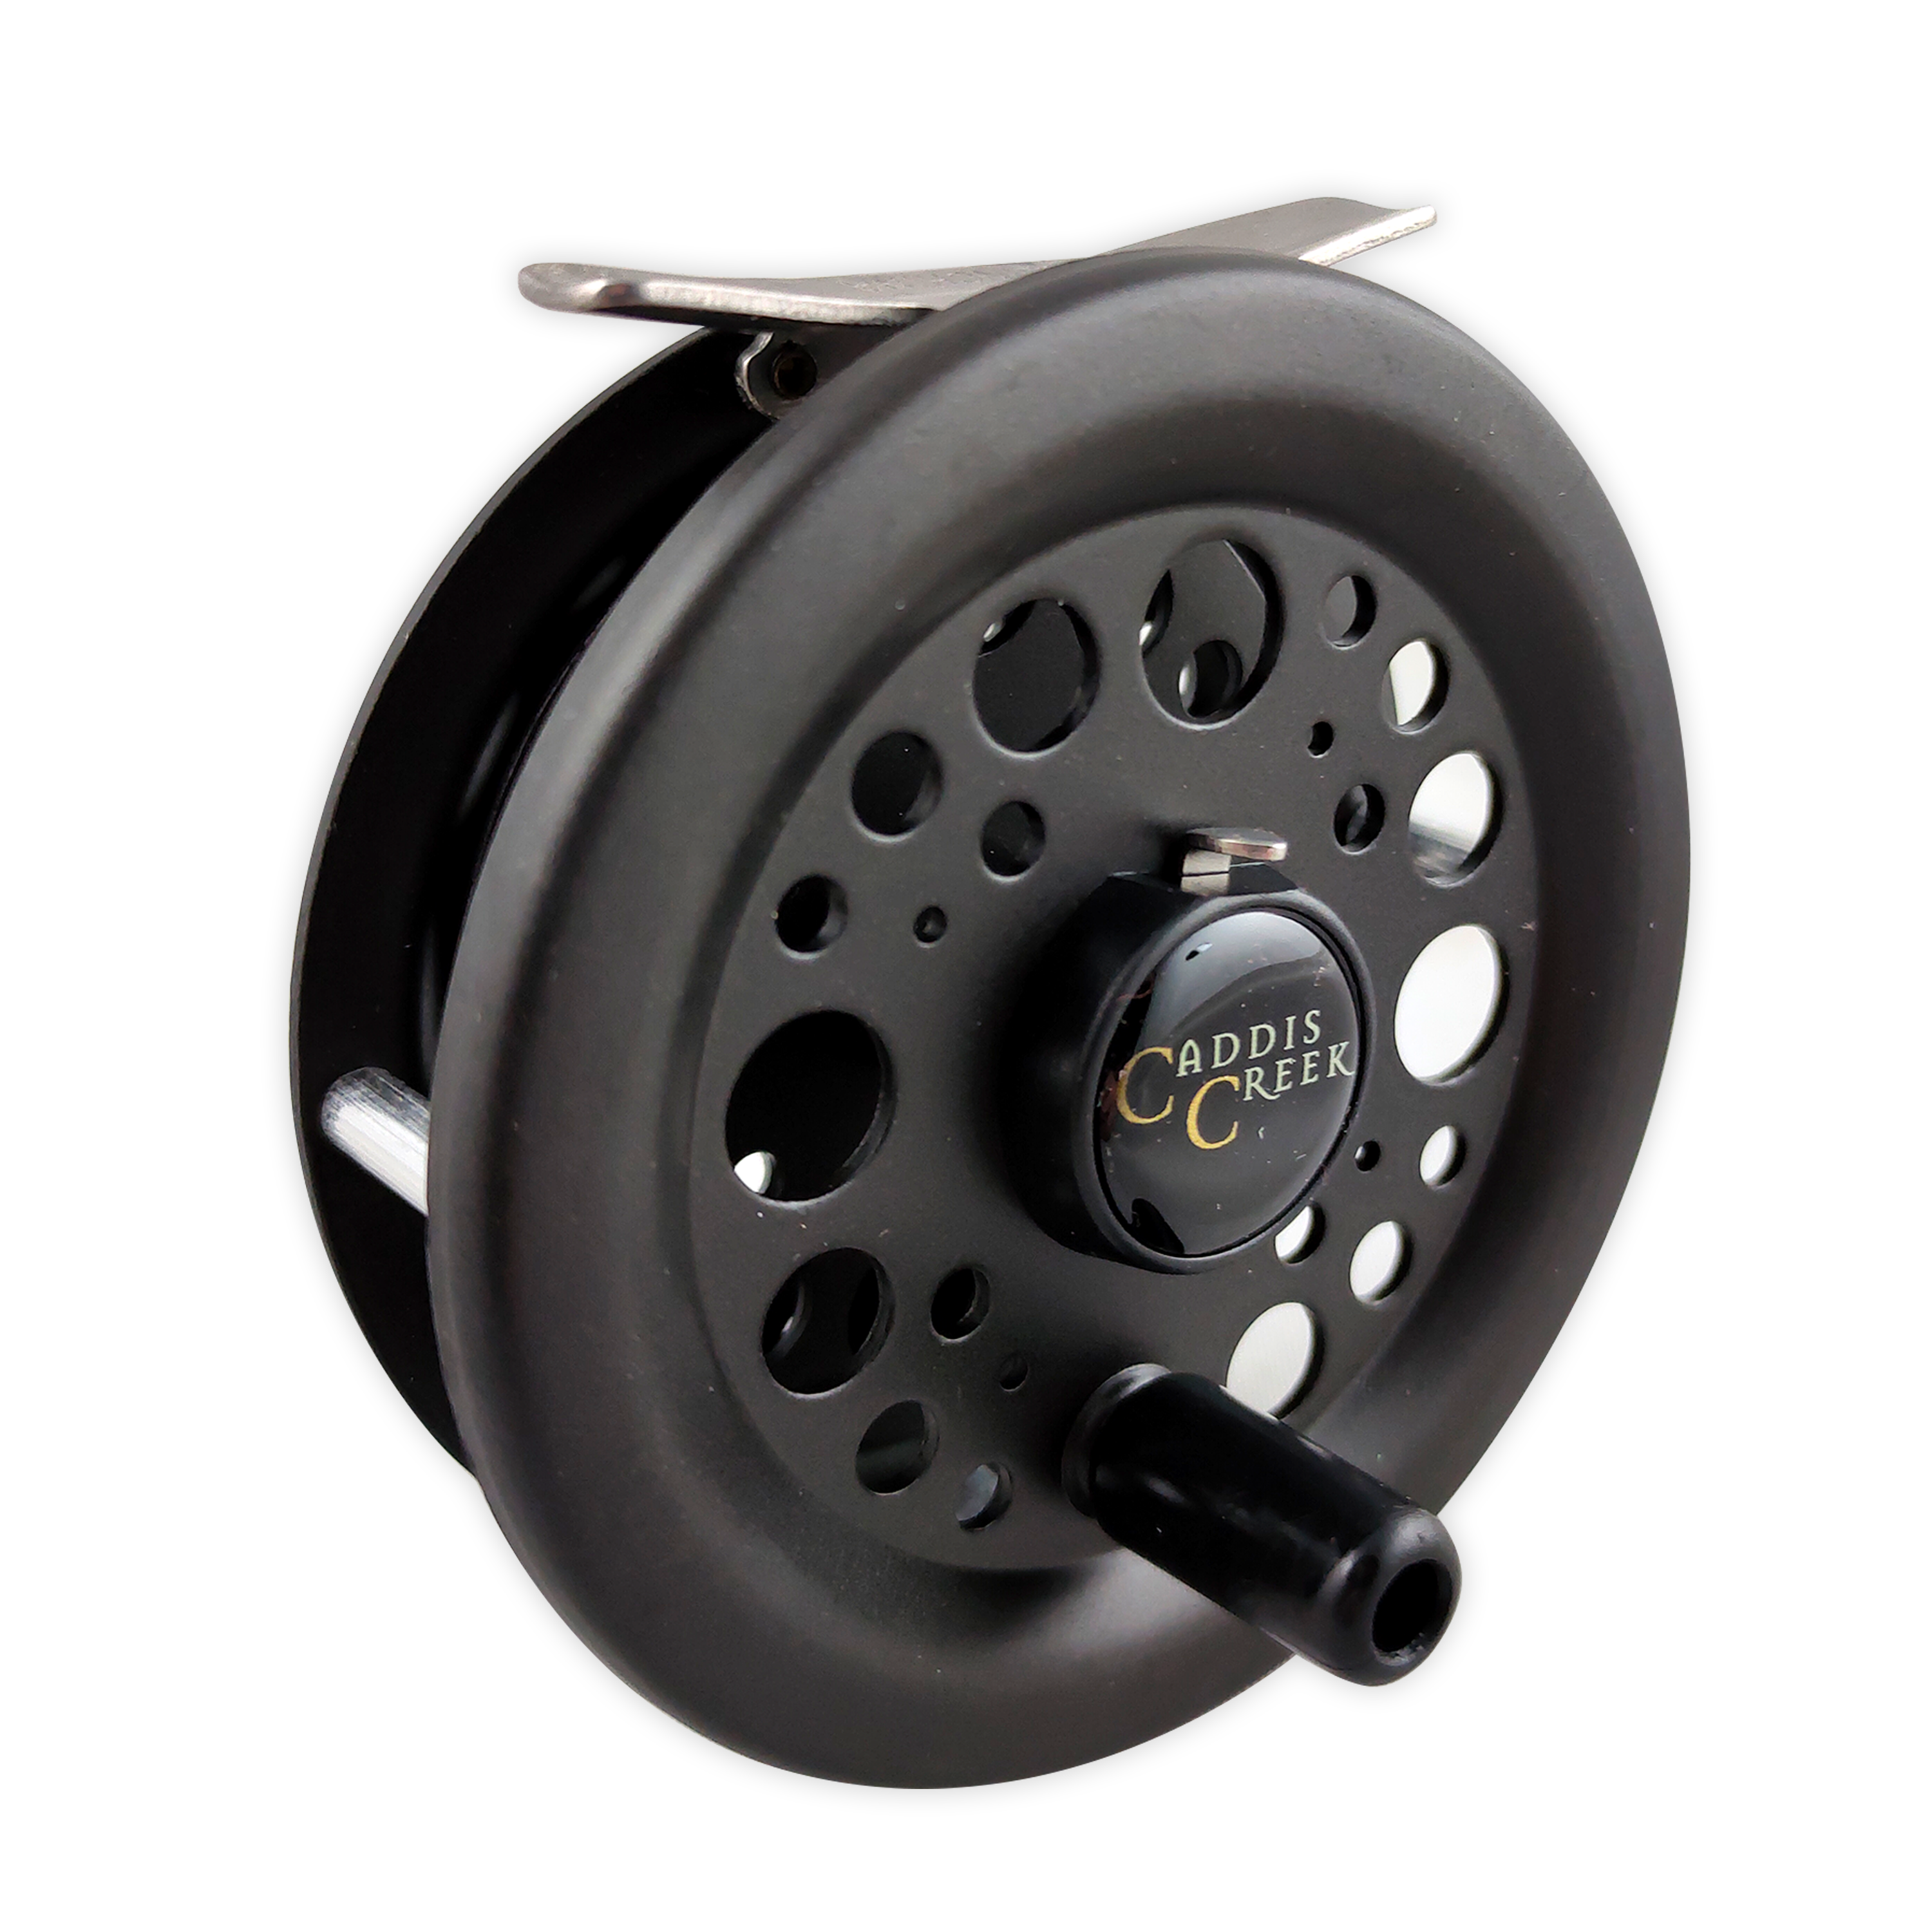 Creative Angler Catalyst Fly Rod and Fly Reel Combo 8wt with Bass Fly  Selection for Fly Fishing